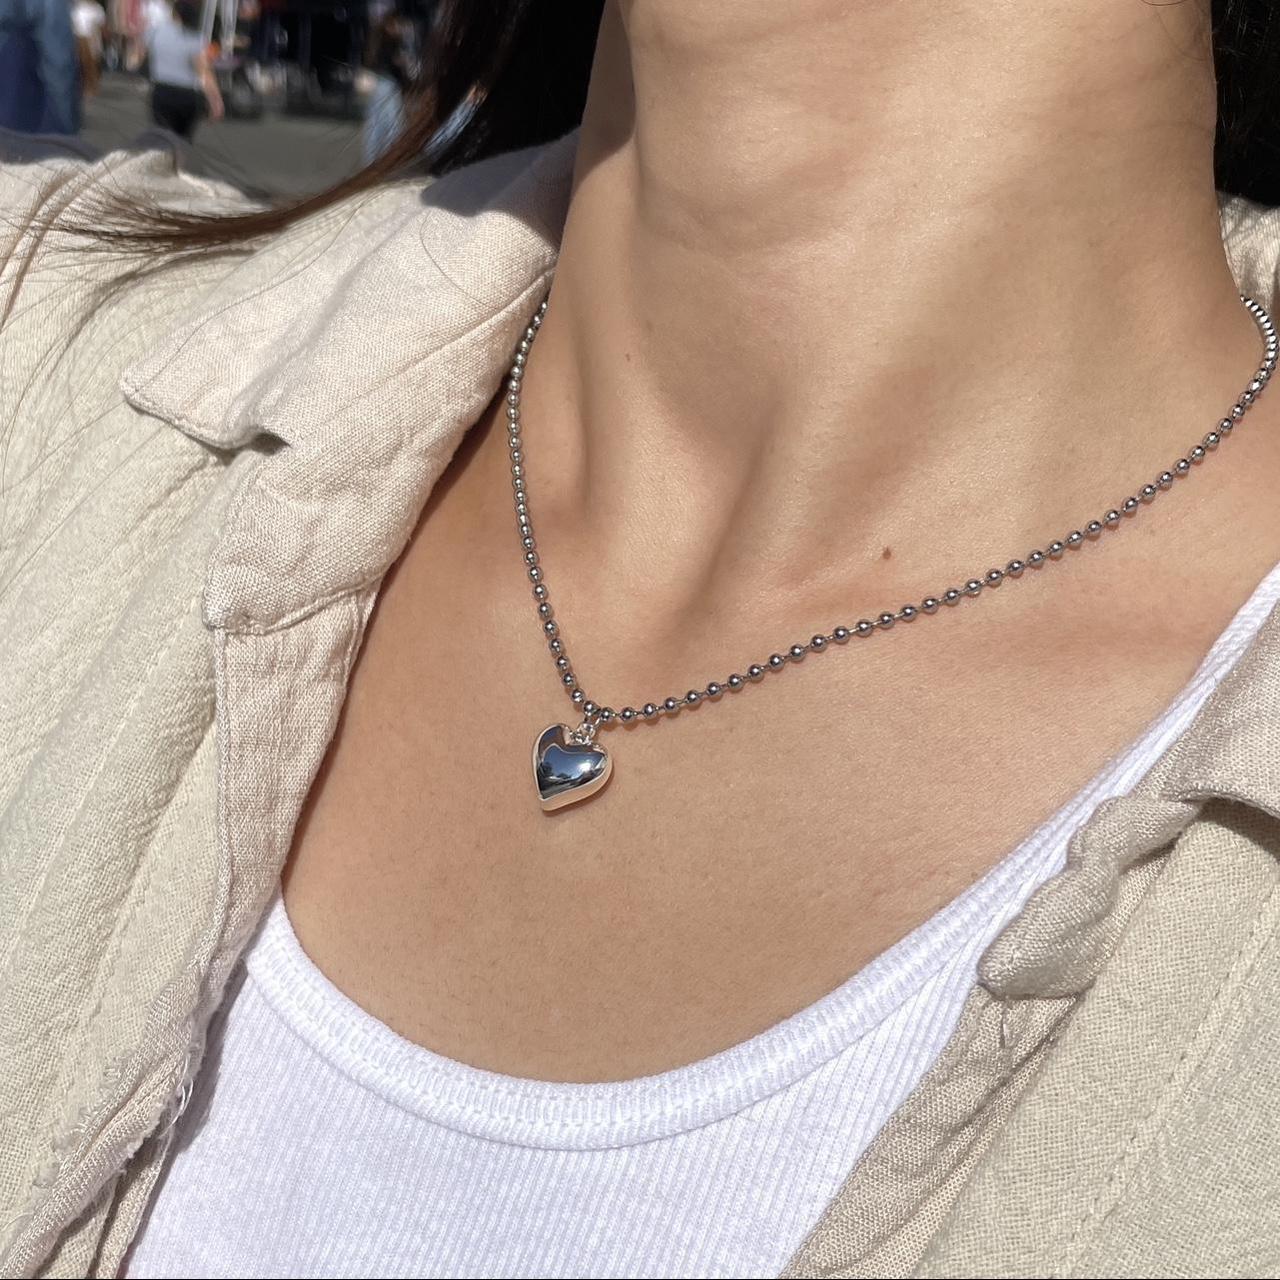 Ball Chain with a Heart Necklace ˚ʚ♡ɞ˚